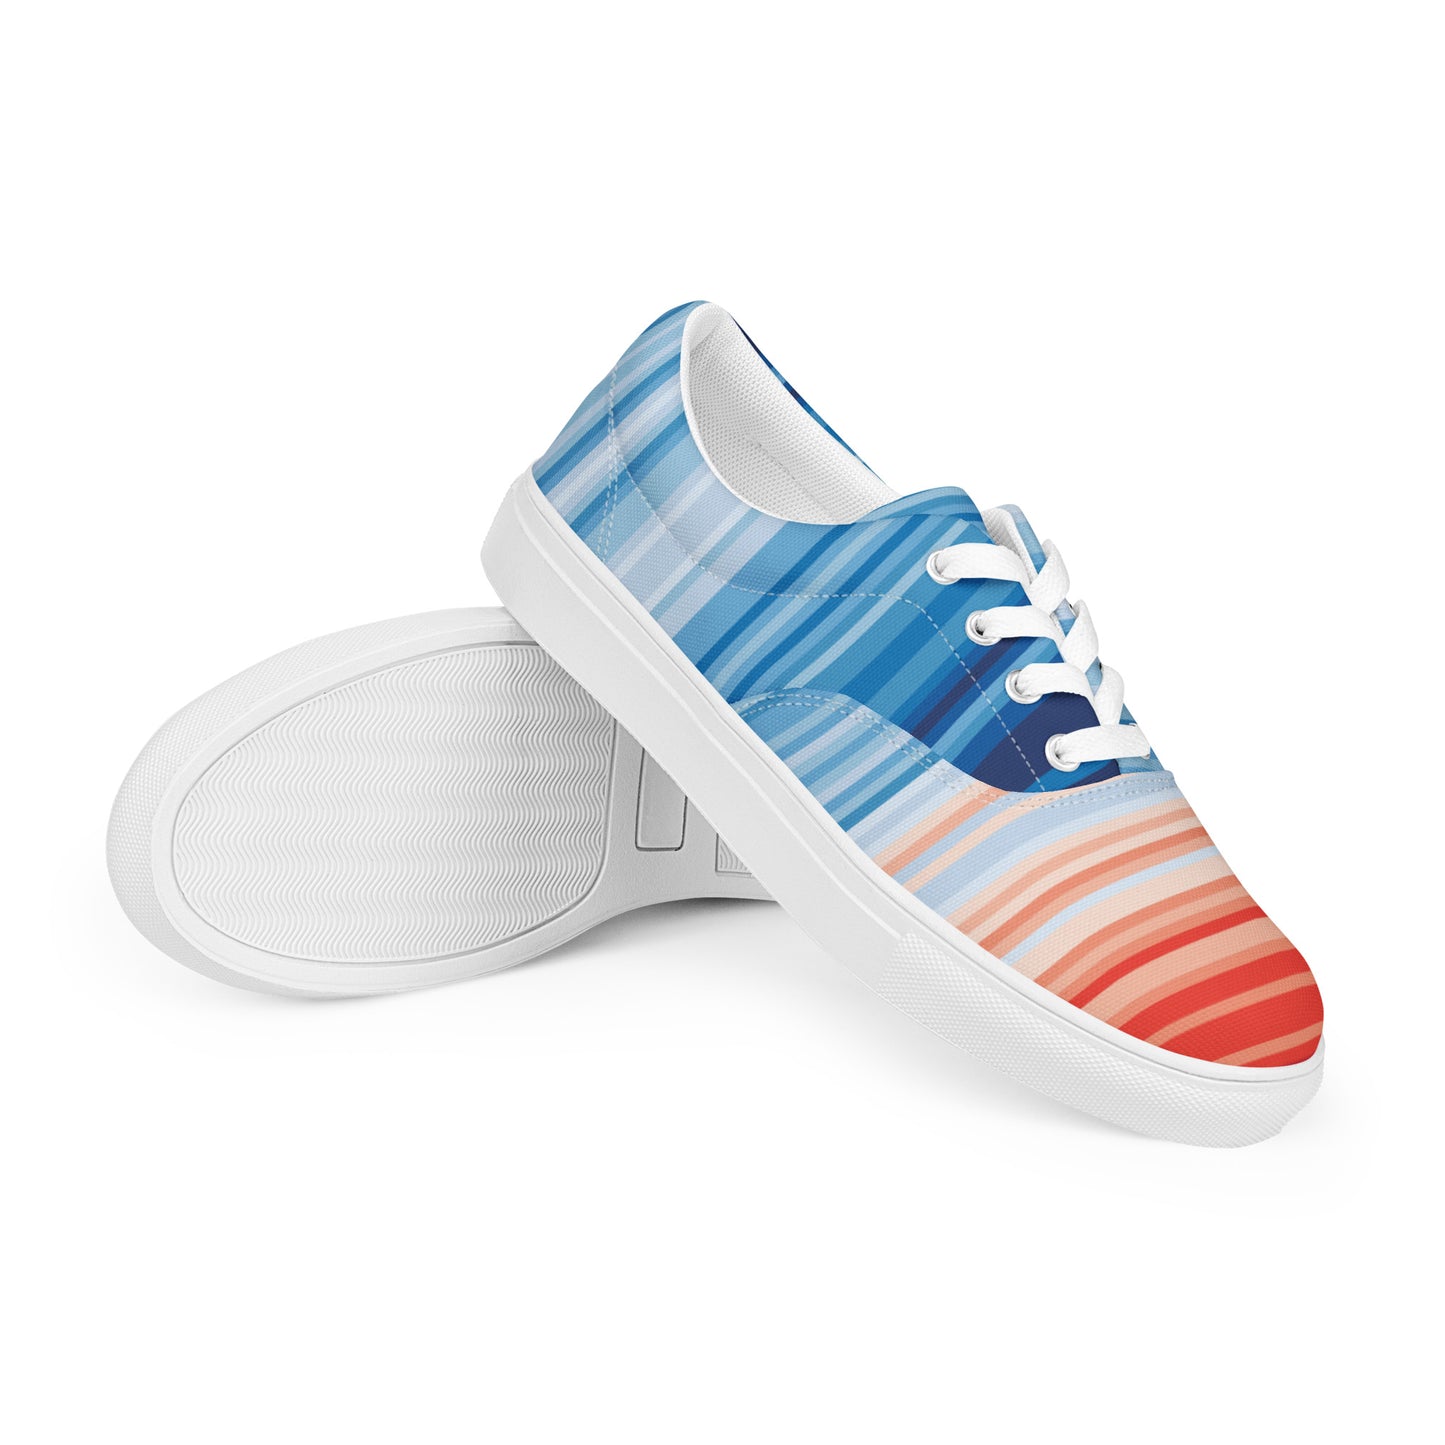 Climate Change Global Warming Stripes - Sustainably Made Men’s lace-up canvas shoes